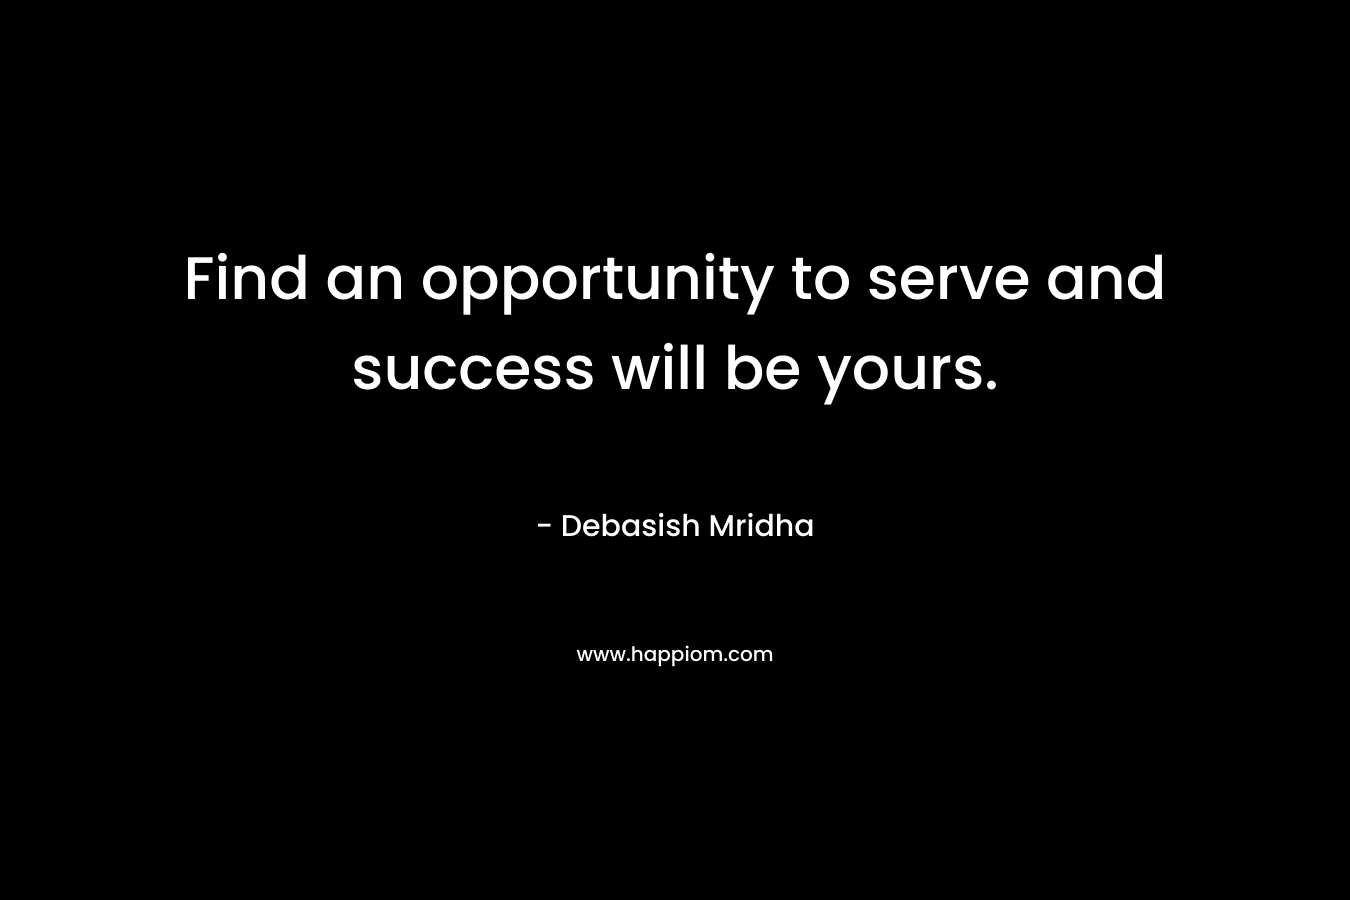 Find an opportunity to serve and success will be yours.